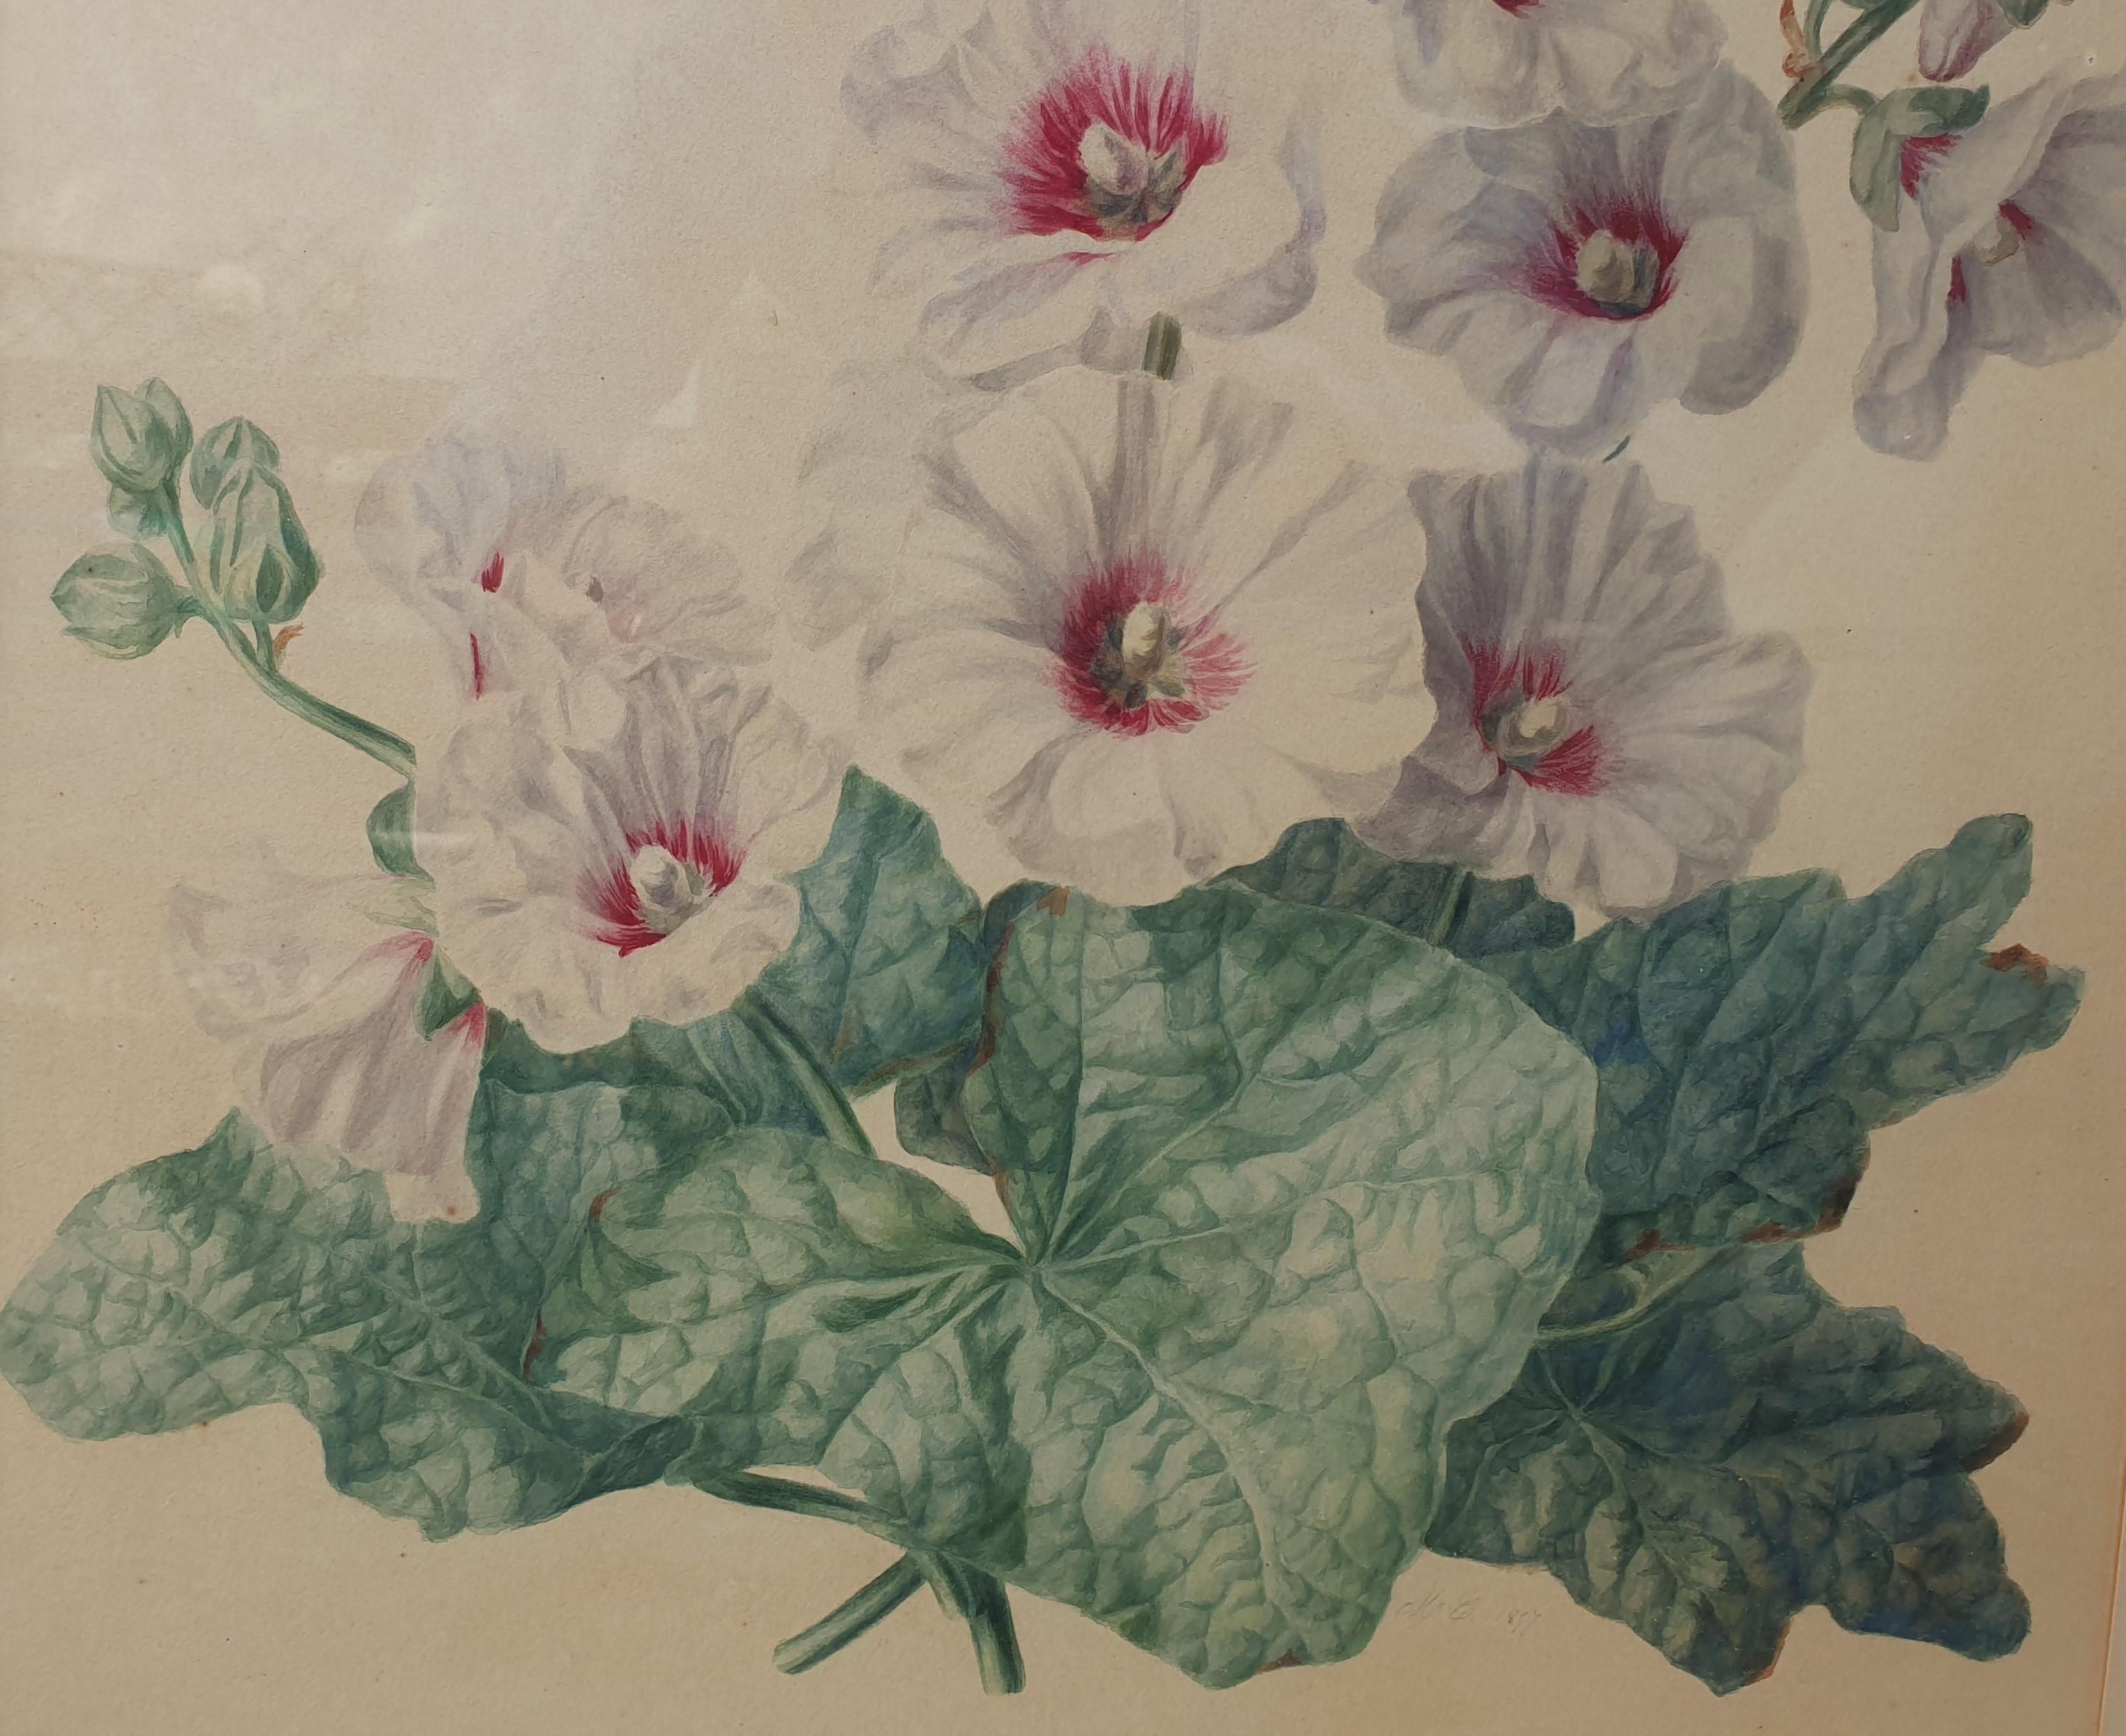 French school of the mid-19th century

Watercolor
51 x 37 cm (69 x 55 cm with frame)
Signed and dated at the bottom “M. C. / 1857”

The hollyhock comes from China, passing through Syria, from where it was brought to us at the time of the